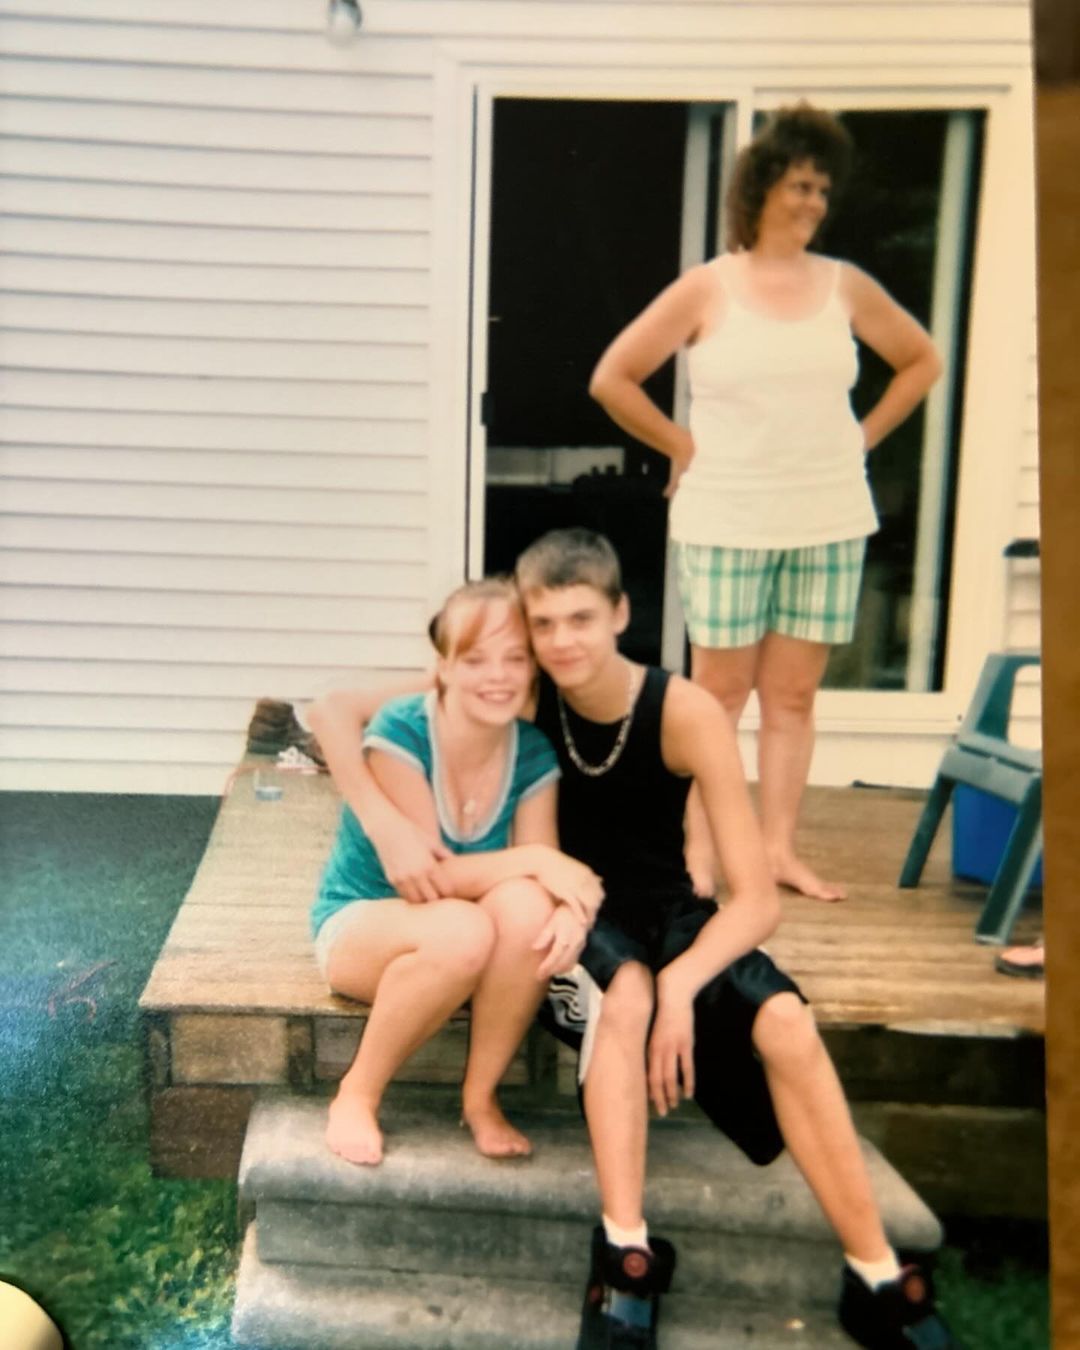 Catelynn's photo appeared to capture the two when they were teens